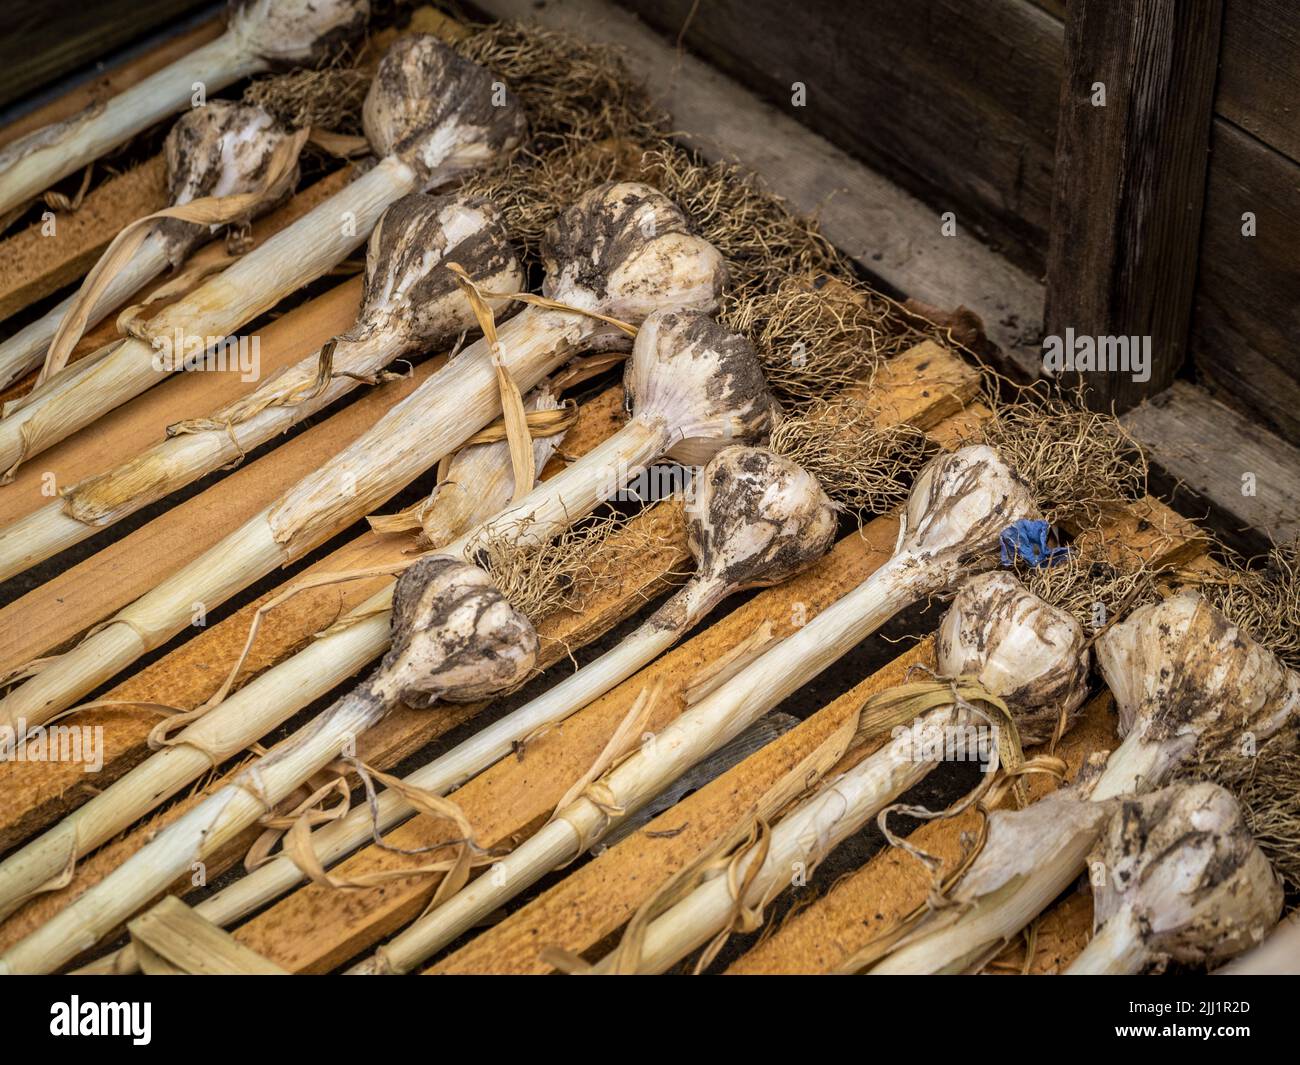 Harvested garlic bulbs drying on a wooden slatted bench. Stock Photo